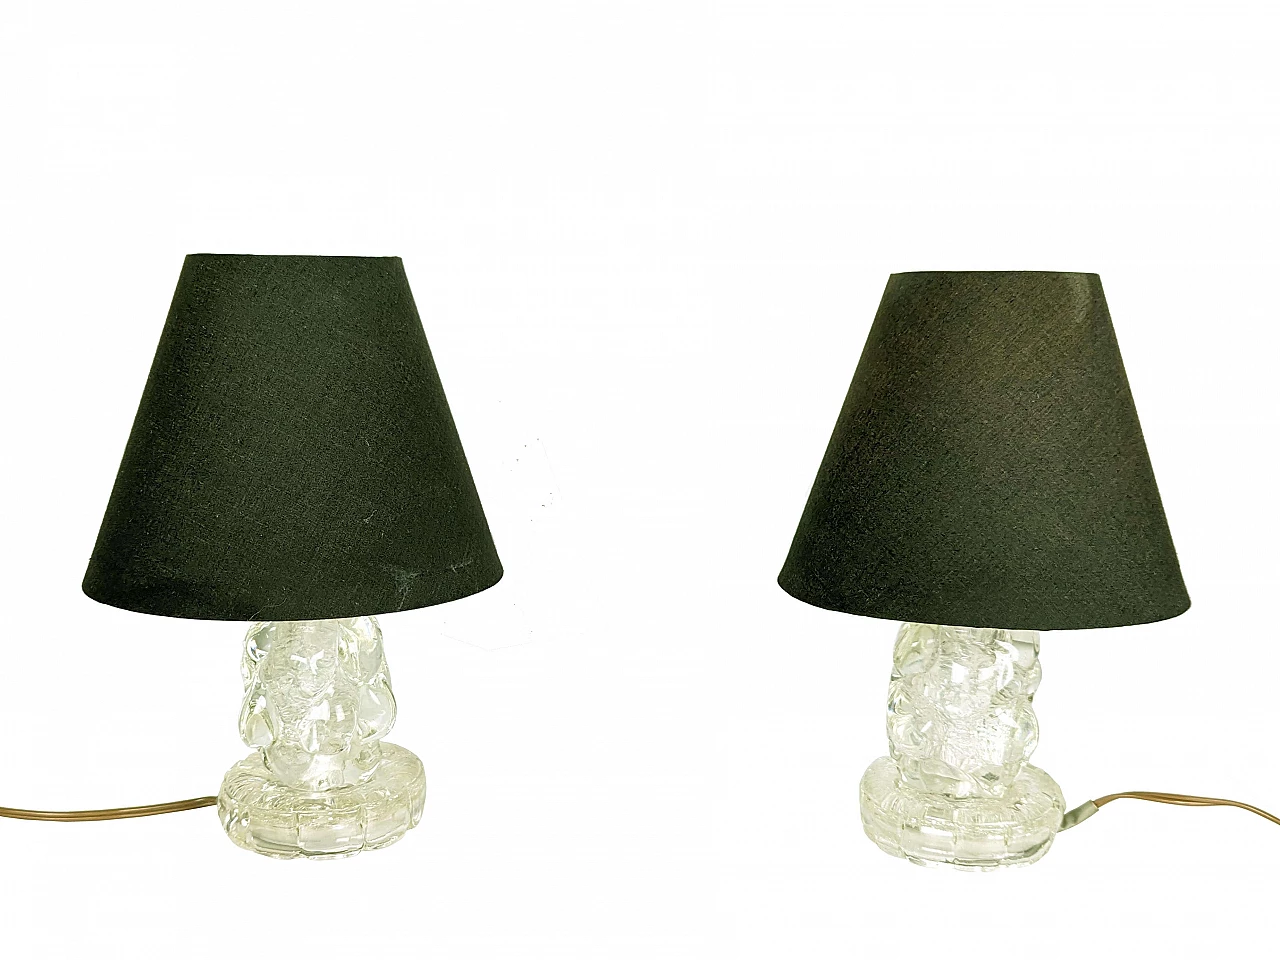 Pair of Murano glass lamps attributed to Barovier & Toso, 1930s 1